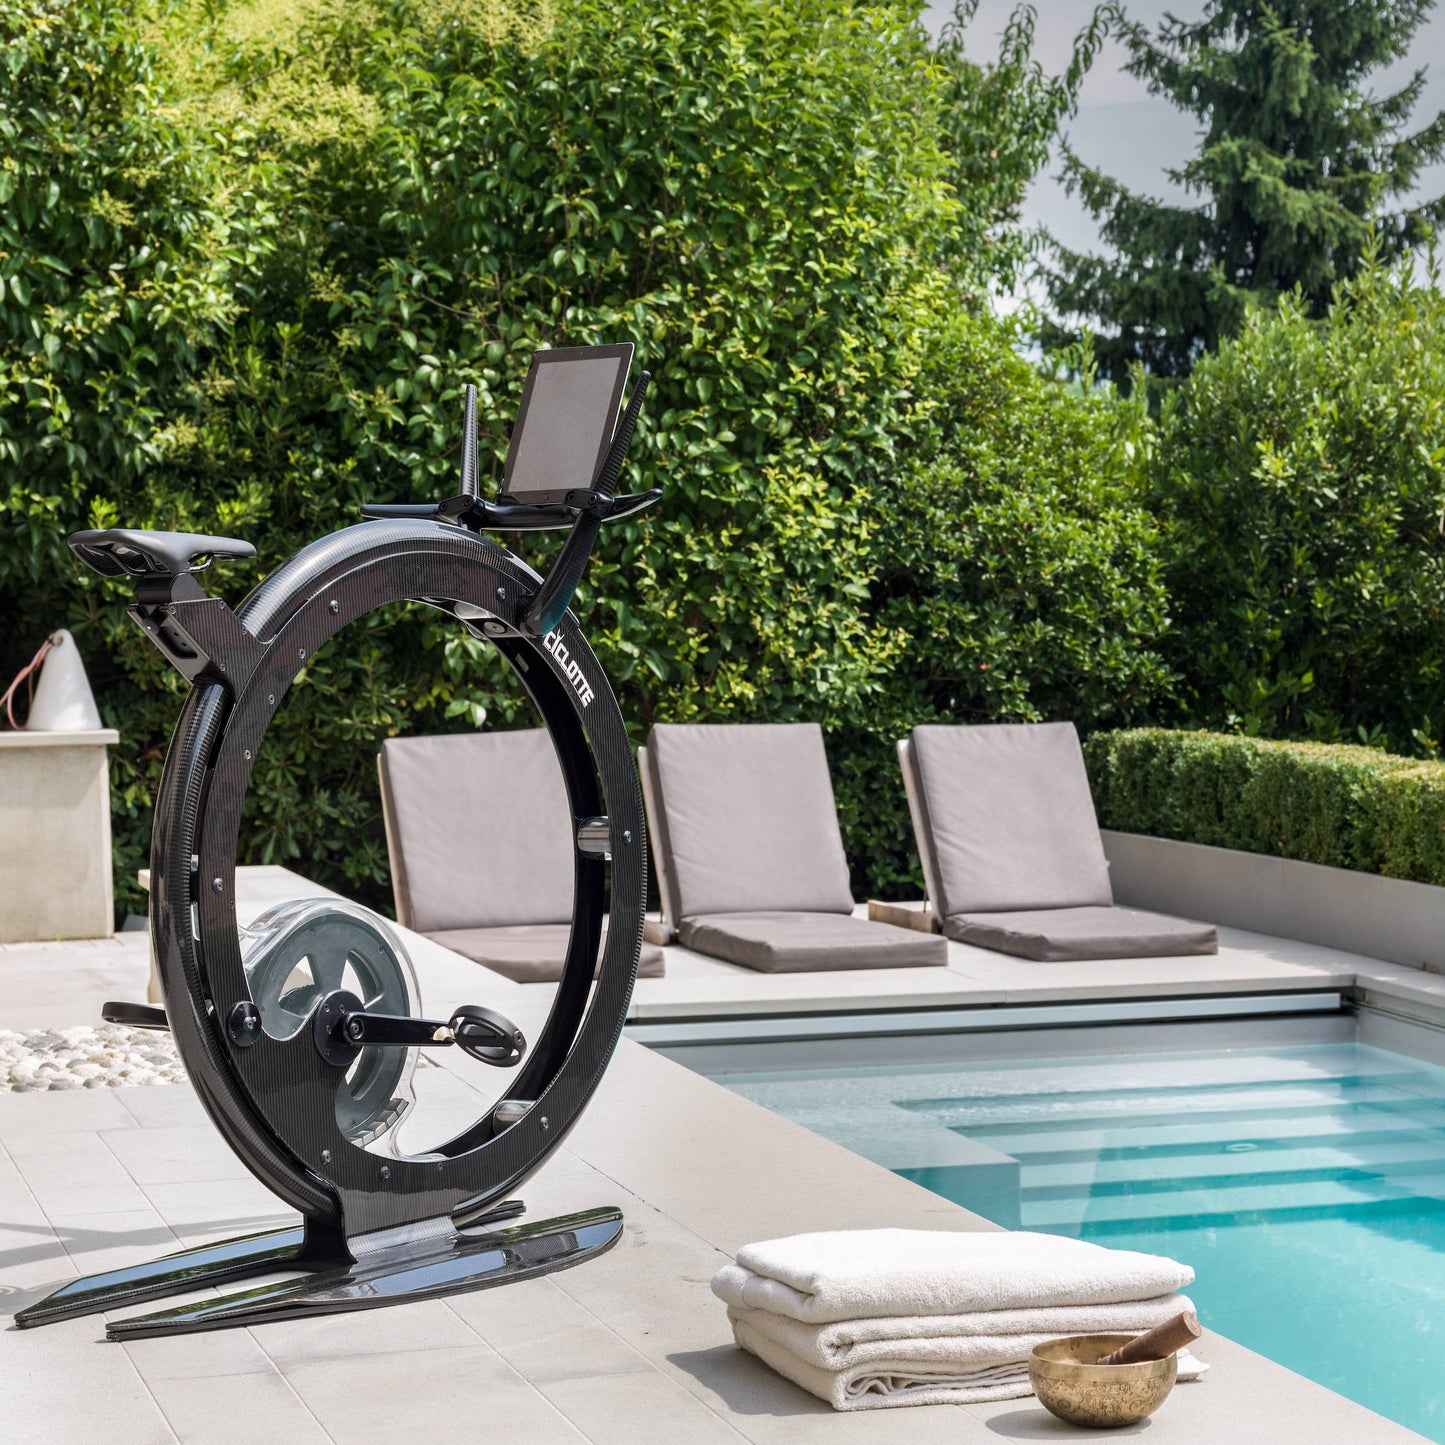 Luxury Home Gym Equipment - Ciclotte Carbon Fibre Bike in Black by Cycling Bears.